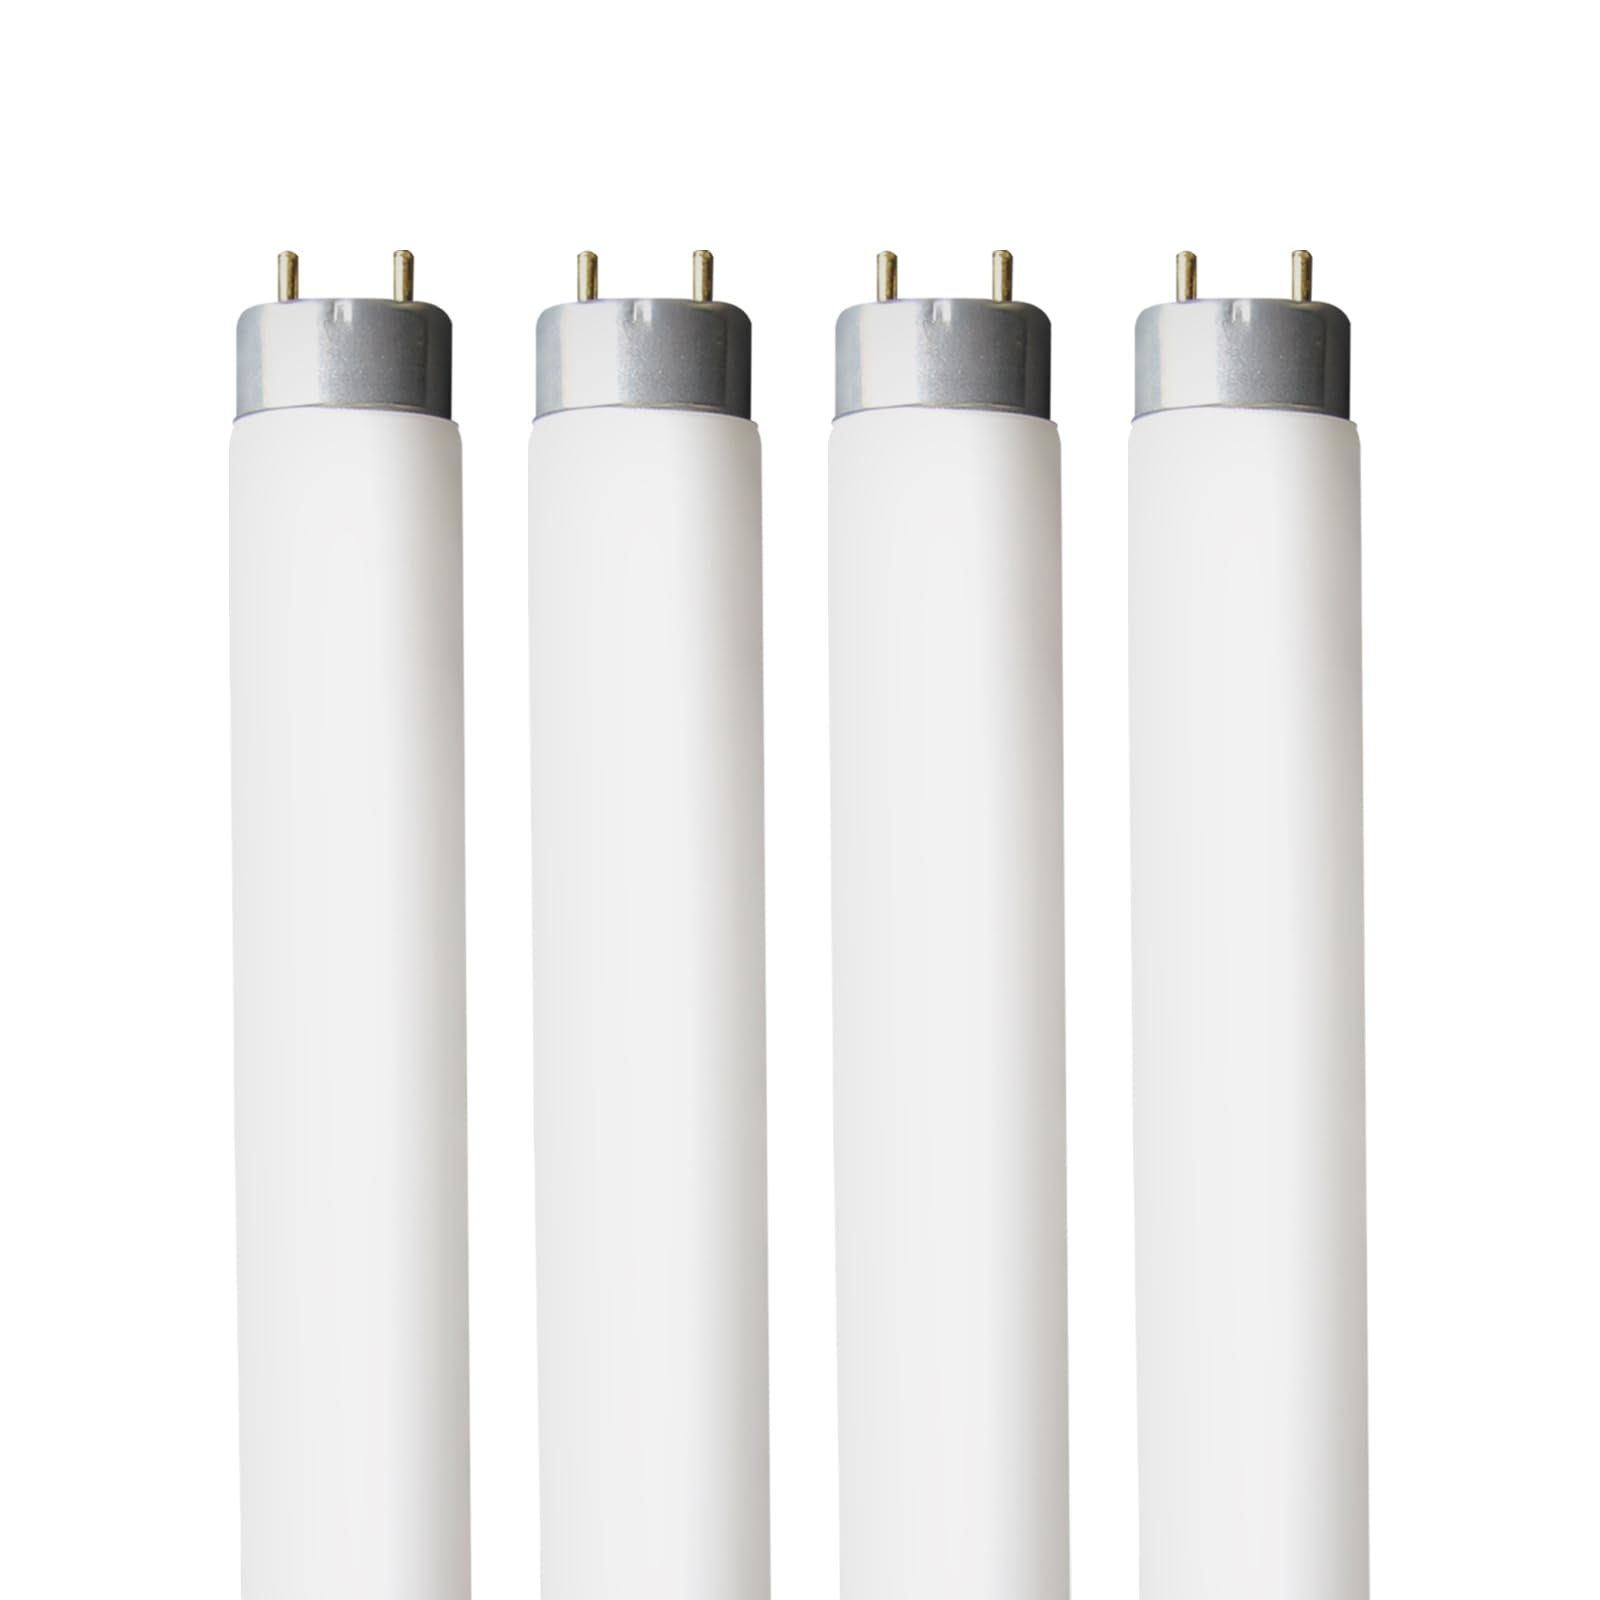 18" F15T8-CW 15 Watt Cool White,T8 Fluorescent Linear Tube Lamp,Replacement Bulb for Philips Alto ECO GE Staco Light Fixture,G13 Bi-Pin Base,4100K (4PACK)  - Like New